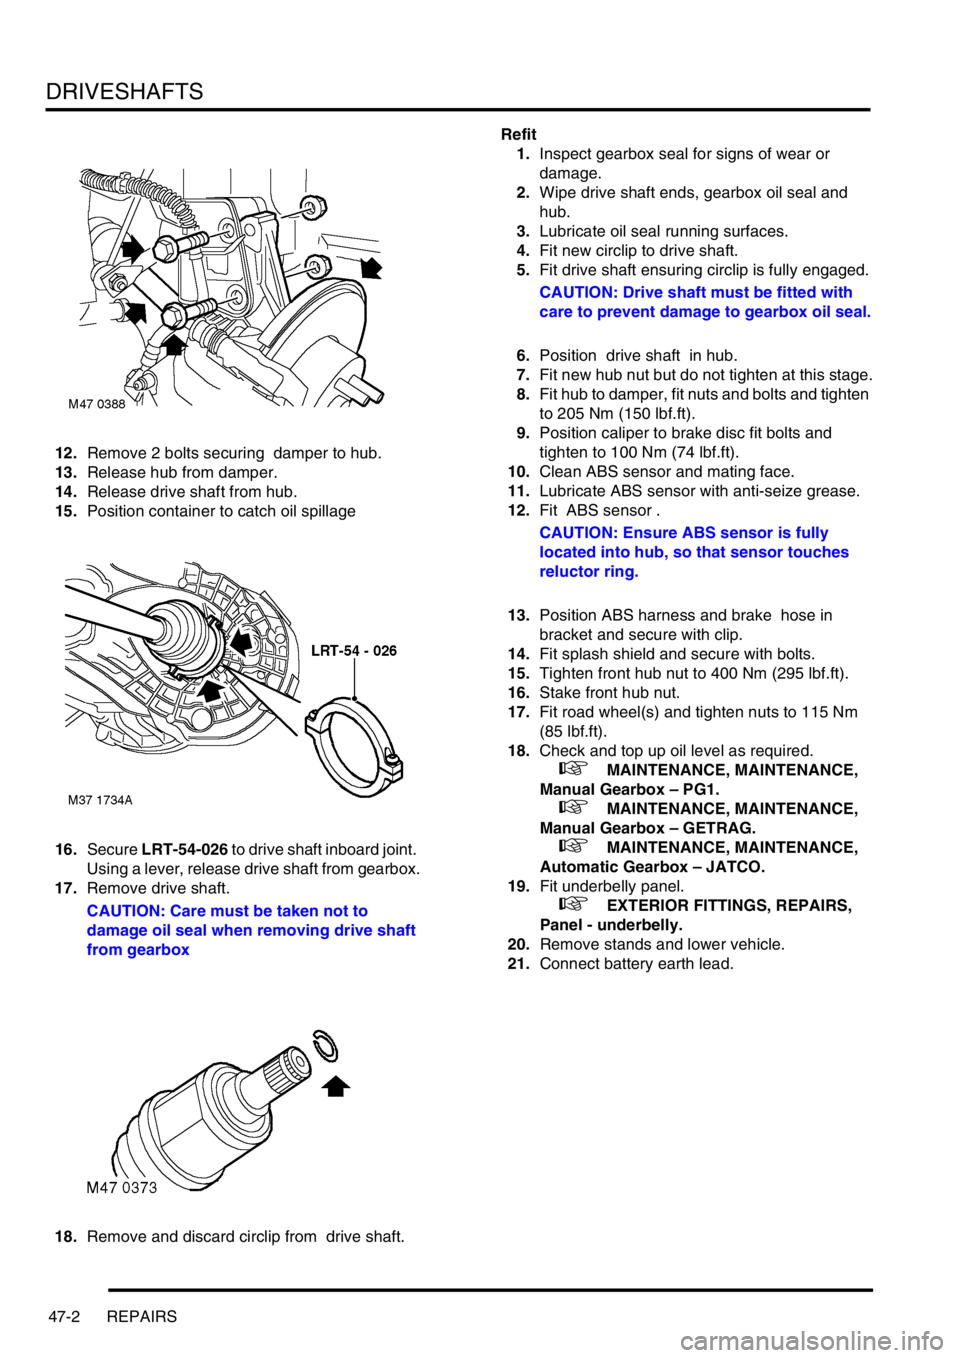 LAND ROVER FREELANDER 2001 User Guide DRIVESHAFTS
47-2 REPAIRS
12.Remove 2 bolts securing  damper to hub.
13.Release hub from damper.
14.Release drive shaft from hub.
15.Position container to catch oil spillage
16.Secure LRT-54-026 to dri